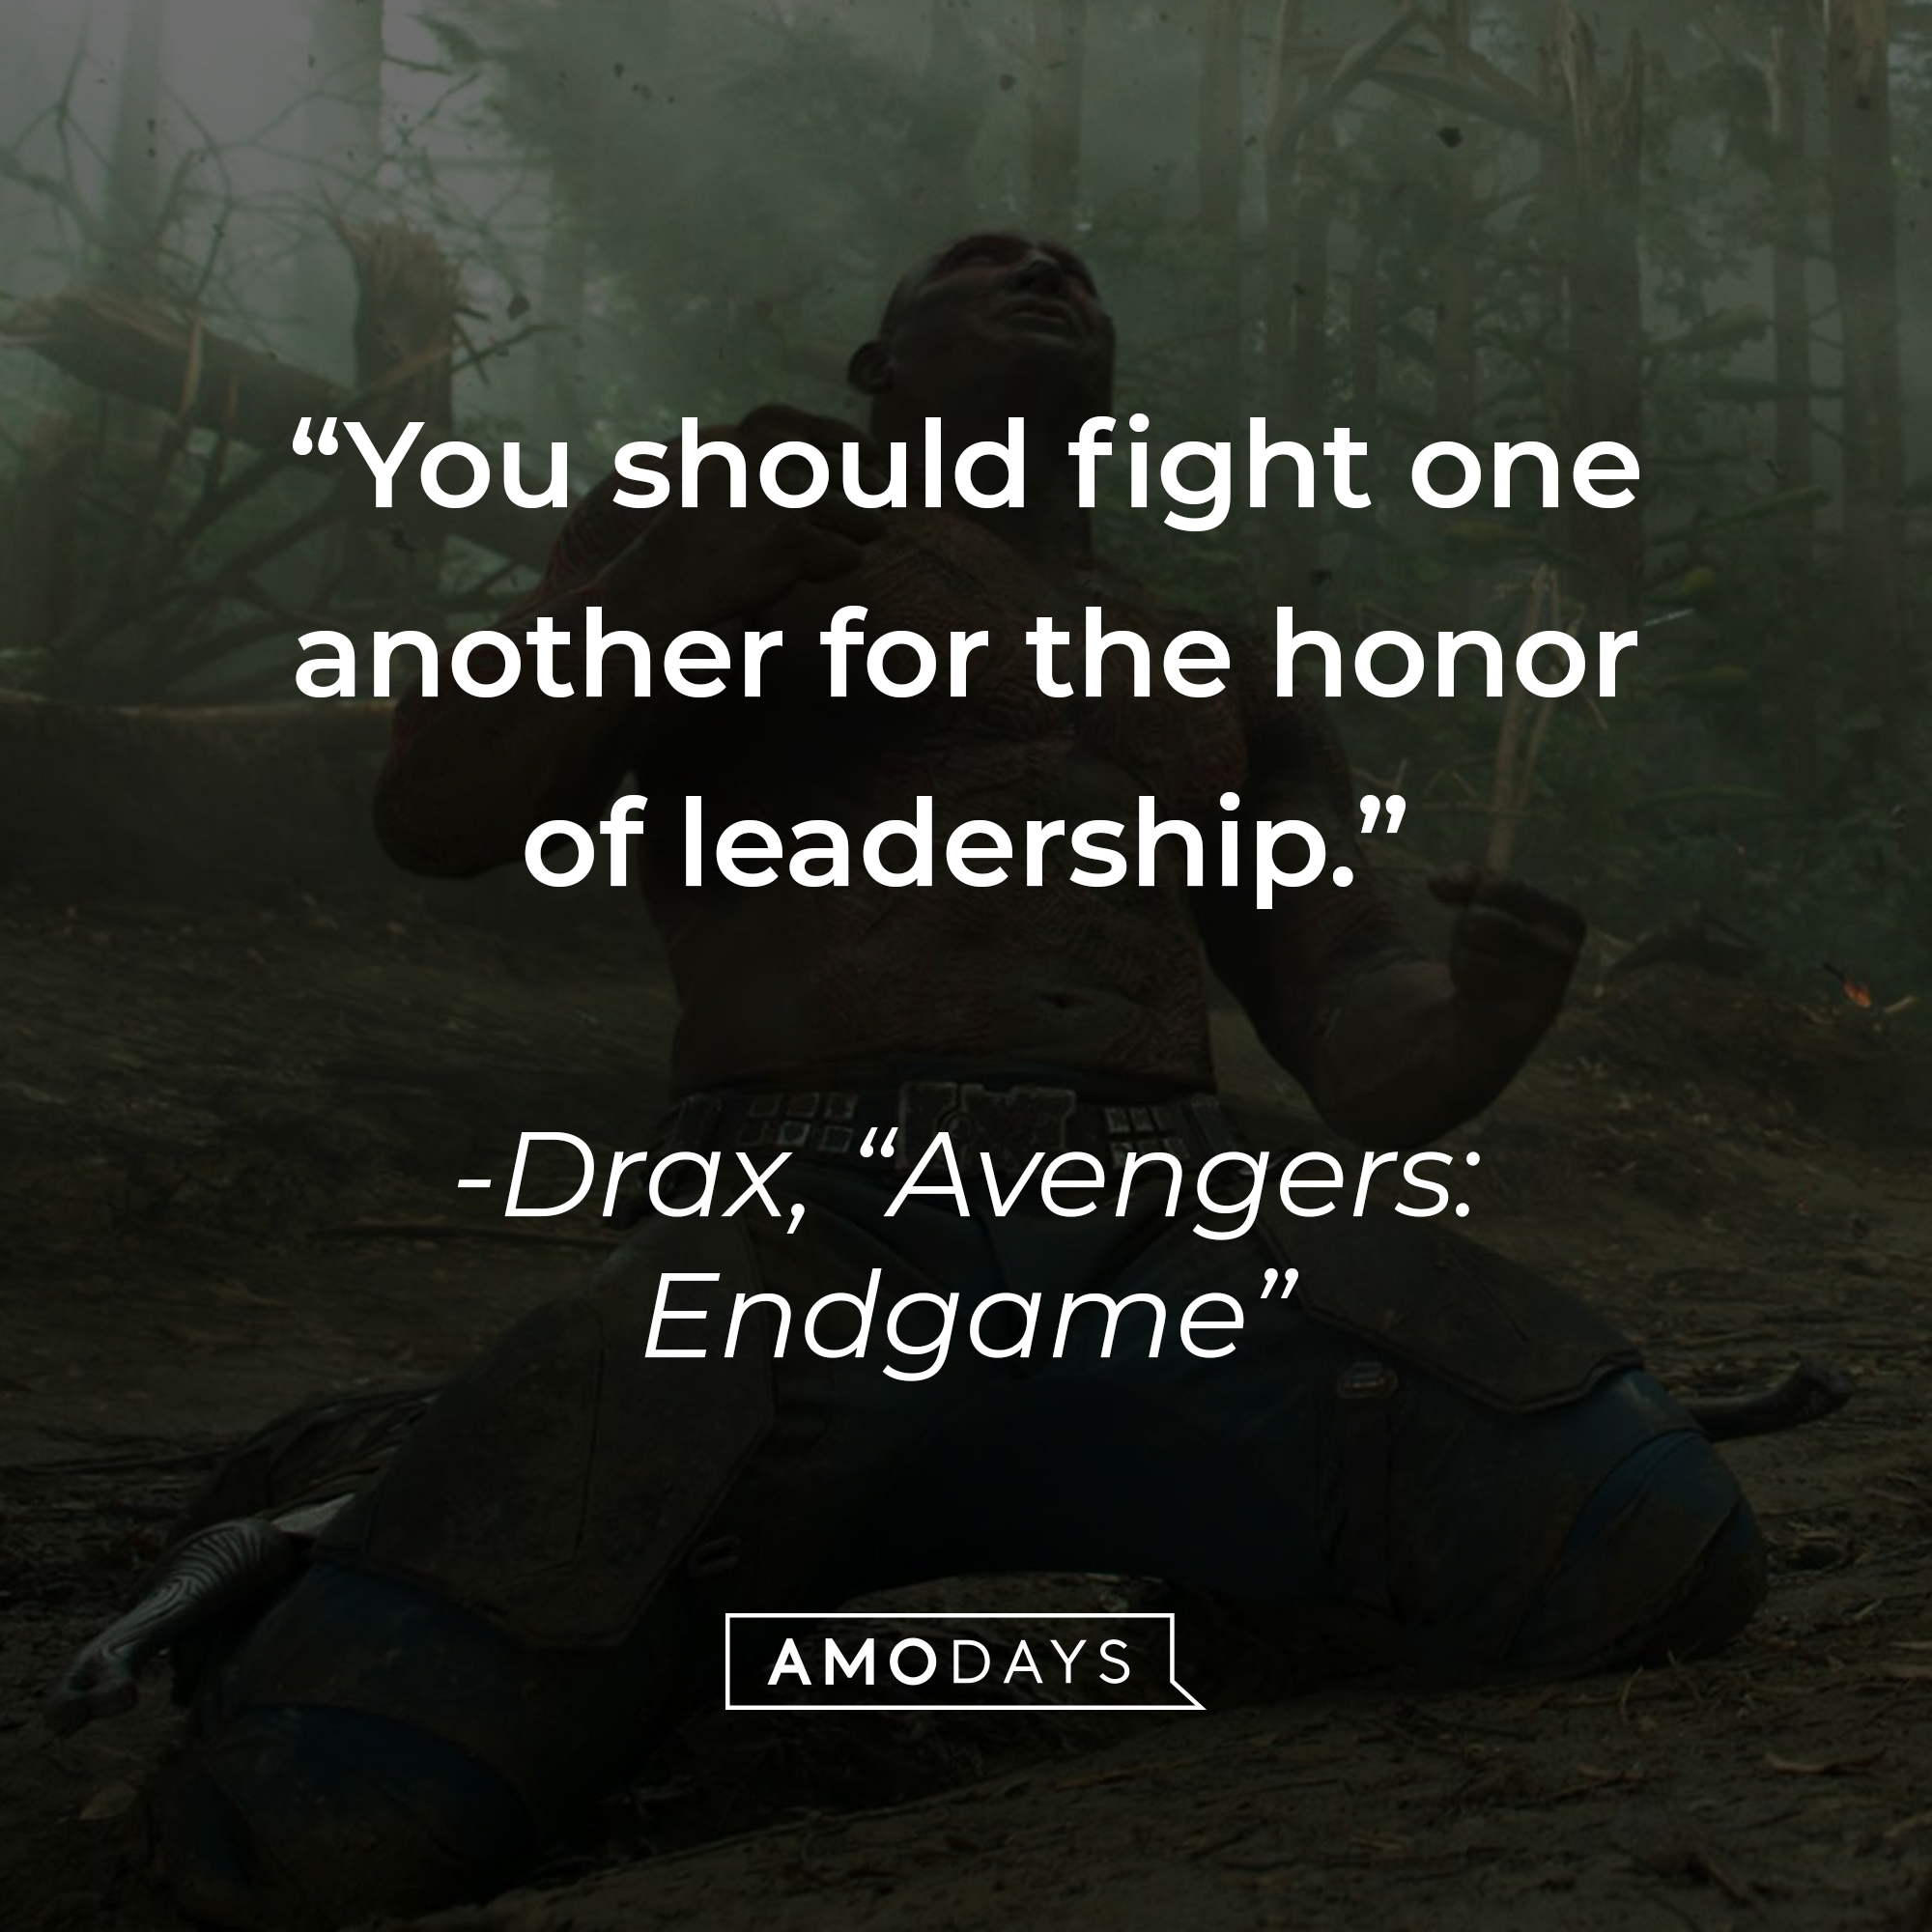 Drax with his quote: "You should fight one another for the honor of leadership." | Source: Facebook.com/guardiansofthegalaxy